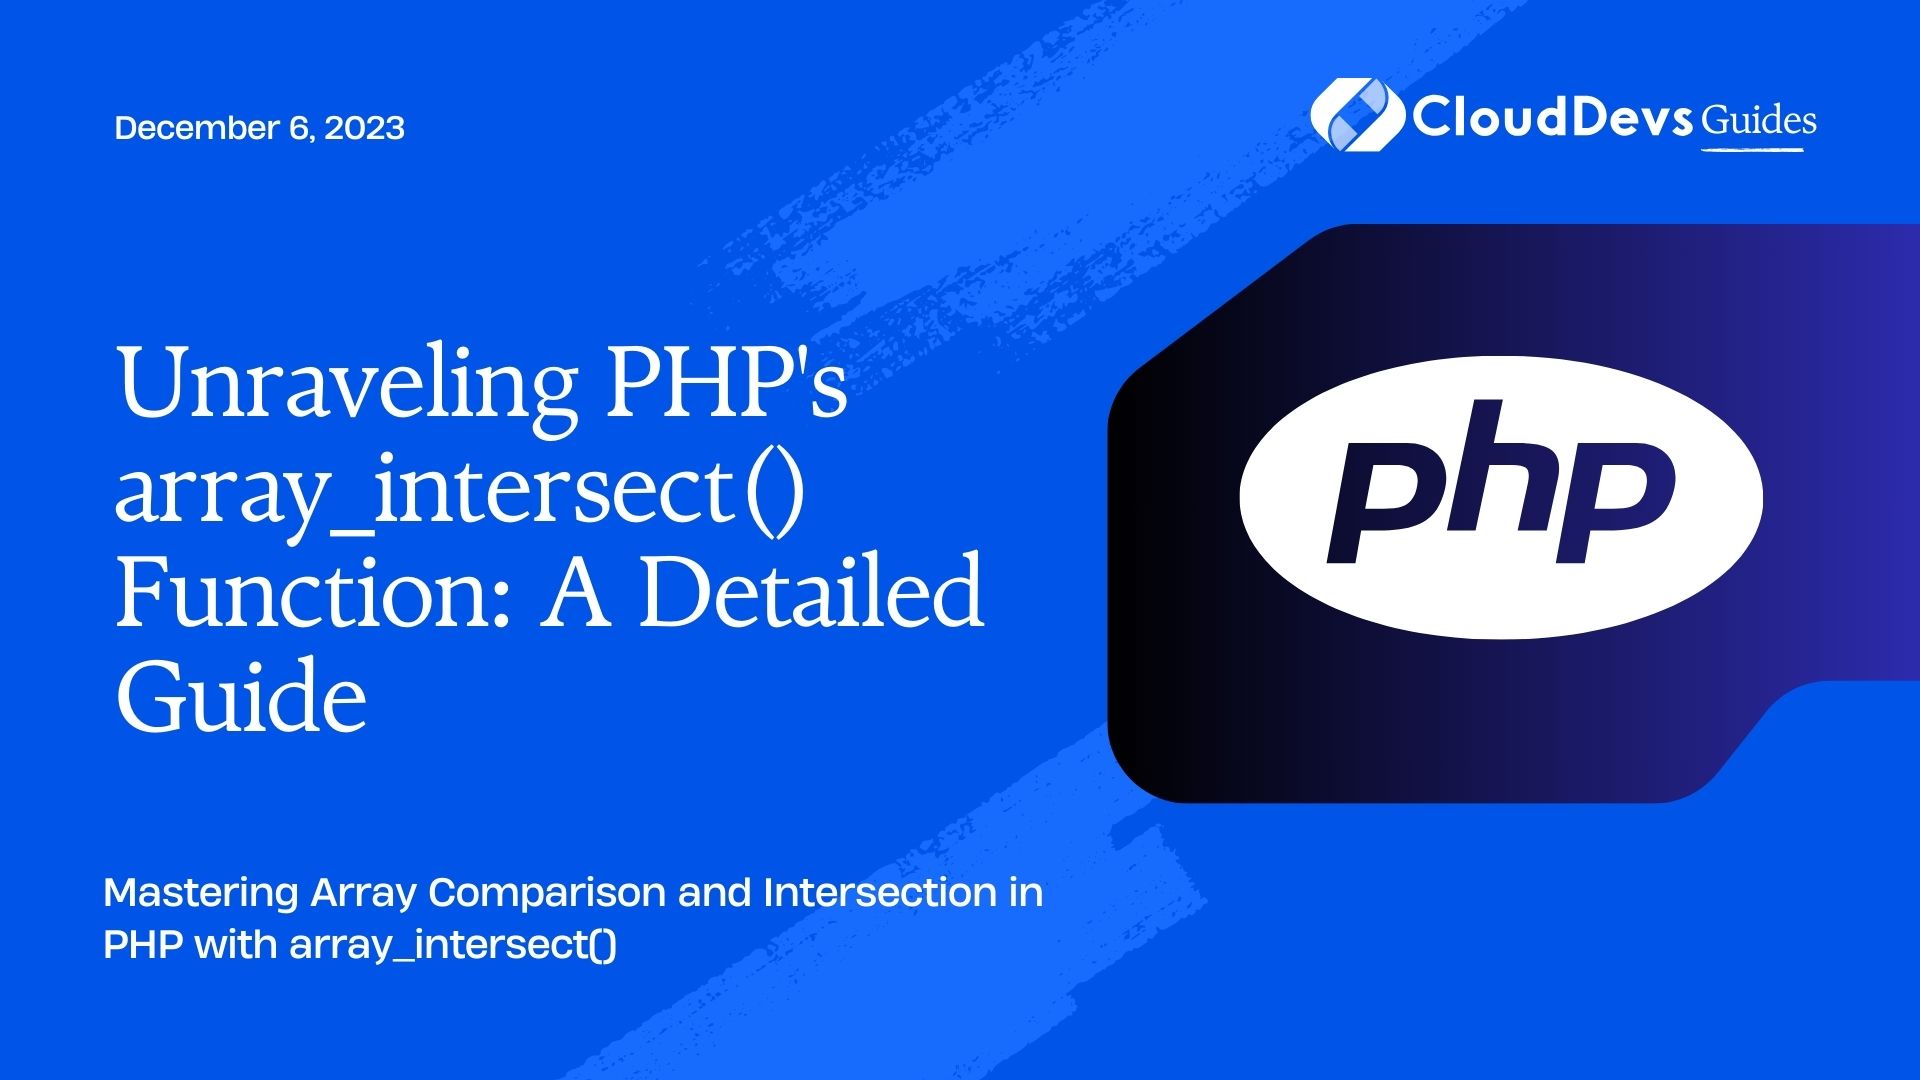 Unraveling PHP's array_intersect() Function: A Detailed Guide